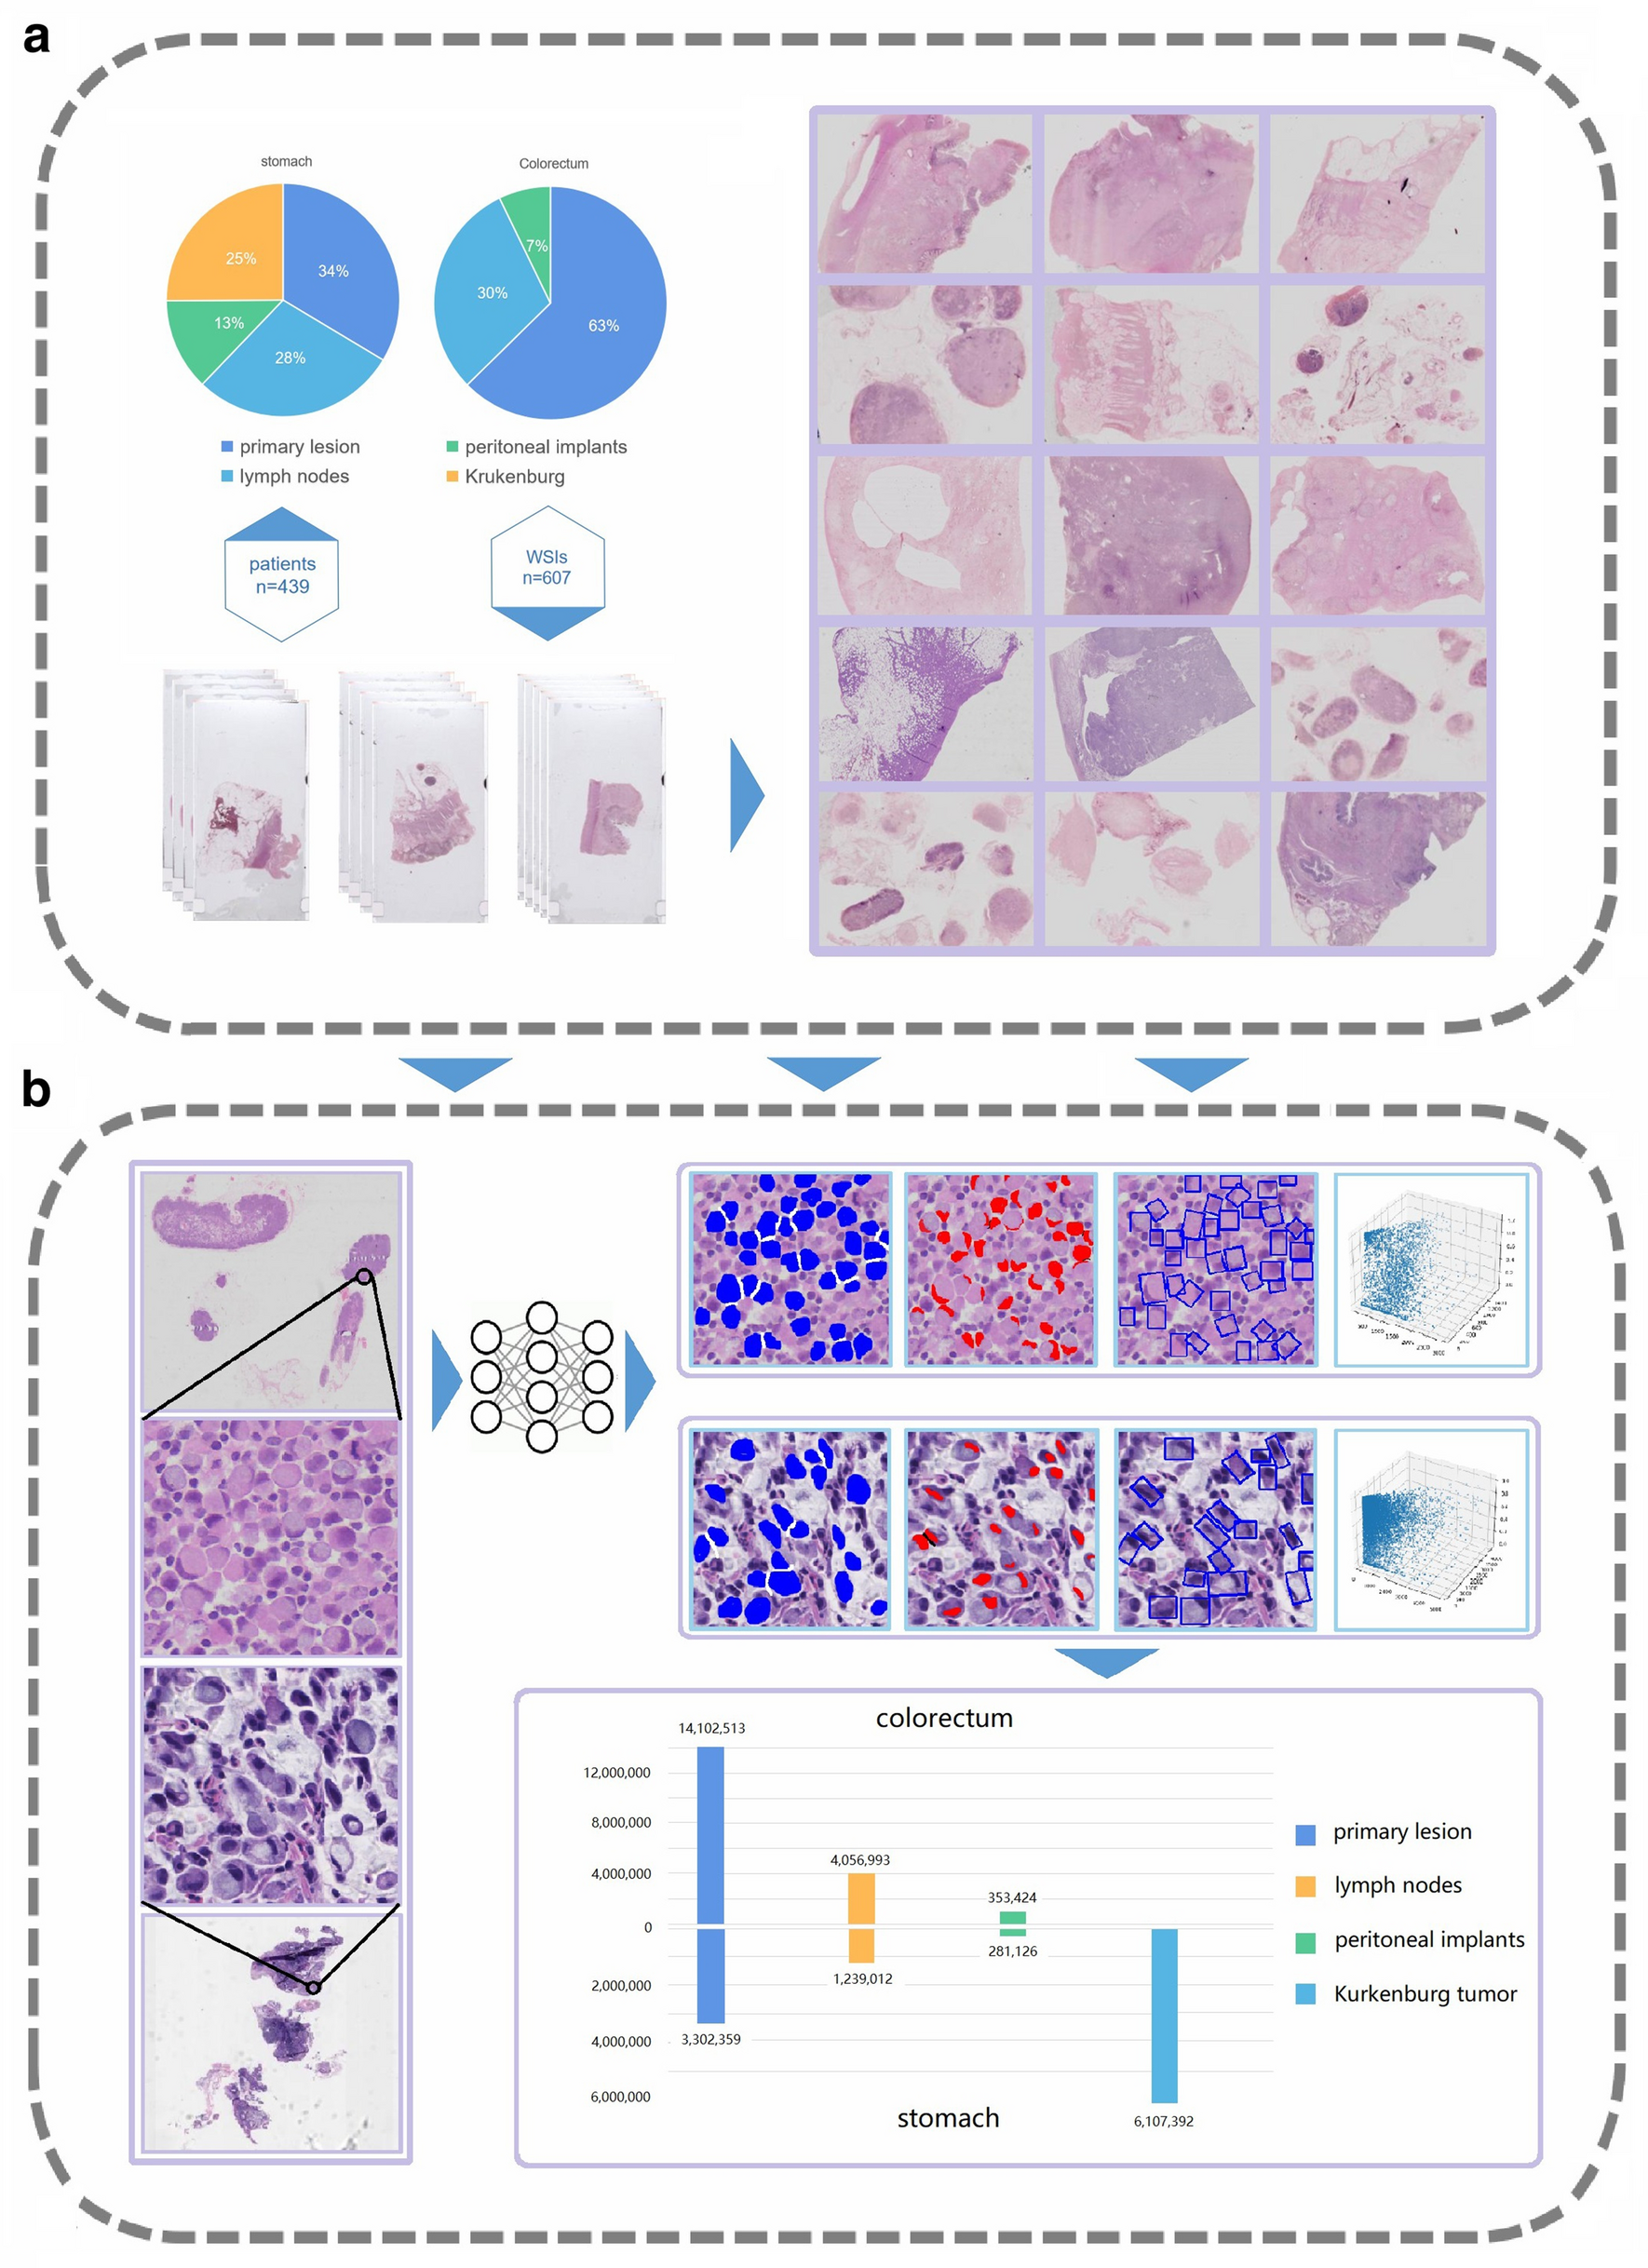 Quantifying the cell morphology and predicting biological behavior of signet  ring cell carcinoma using deep learning | Scientific Reports